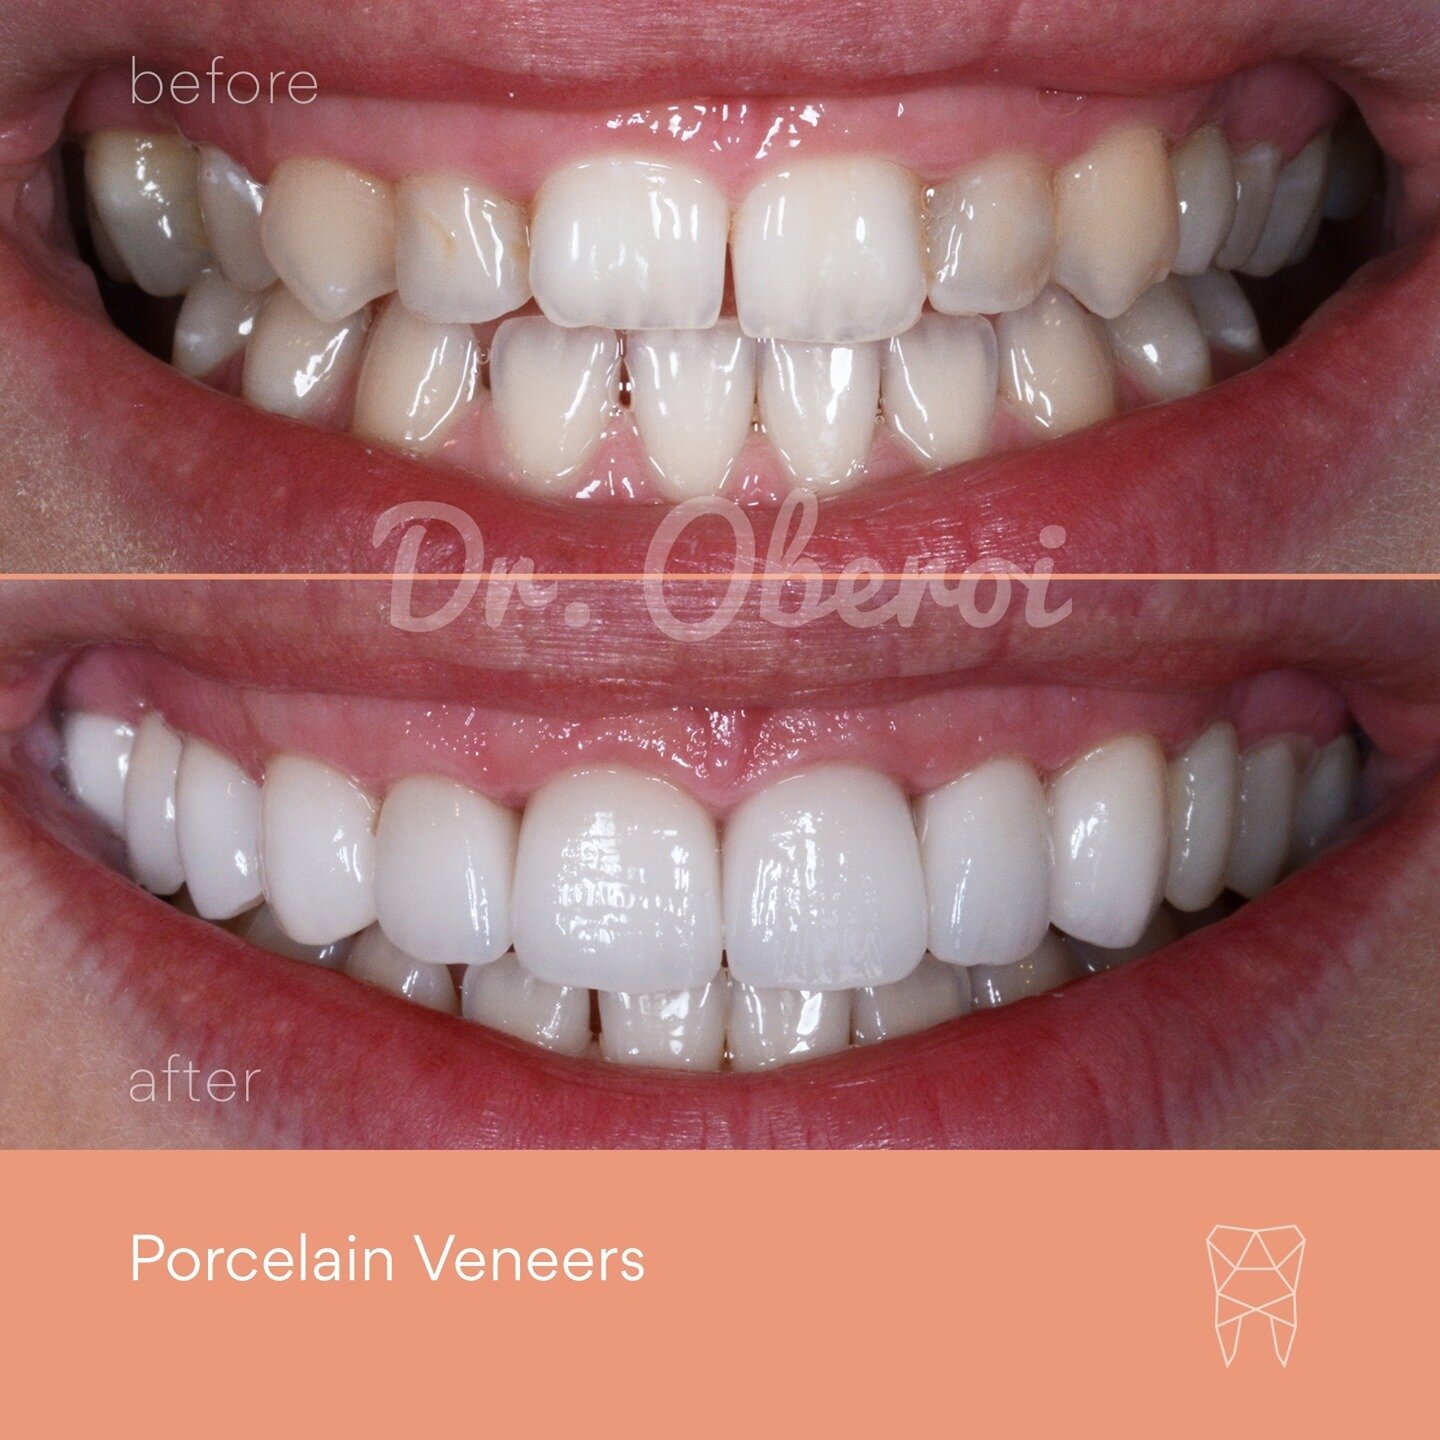 New pearly white porcelain veneers check ✓ What do you think of the results from this #smilemakeover with Dr Oberoi?⁠
⁠
Considering a smile makeover? Smile Now, Pay Later with interest-free payment plans from Afterpay, Openpay &amp; Zip. Enquire or b